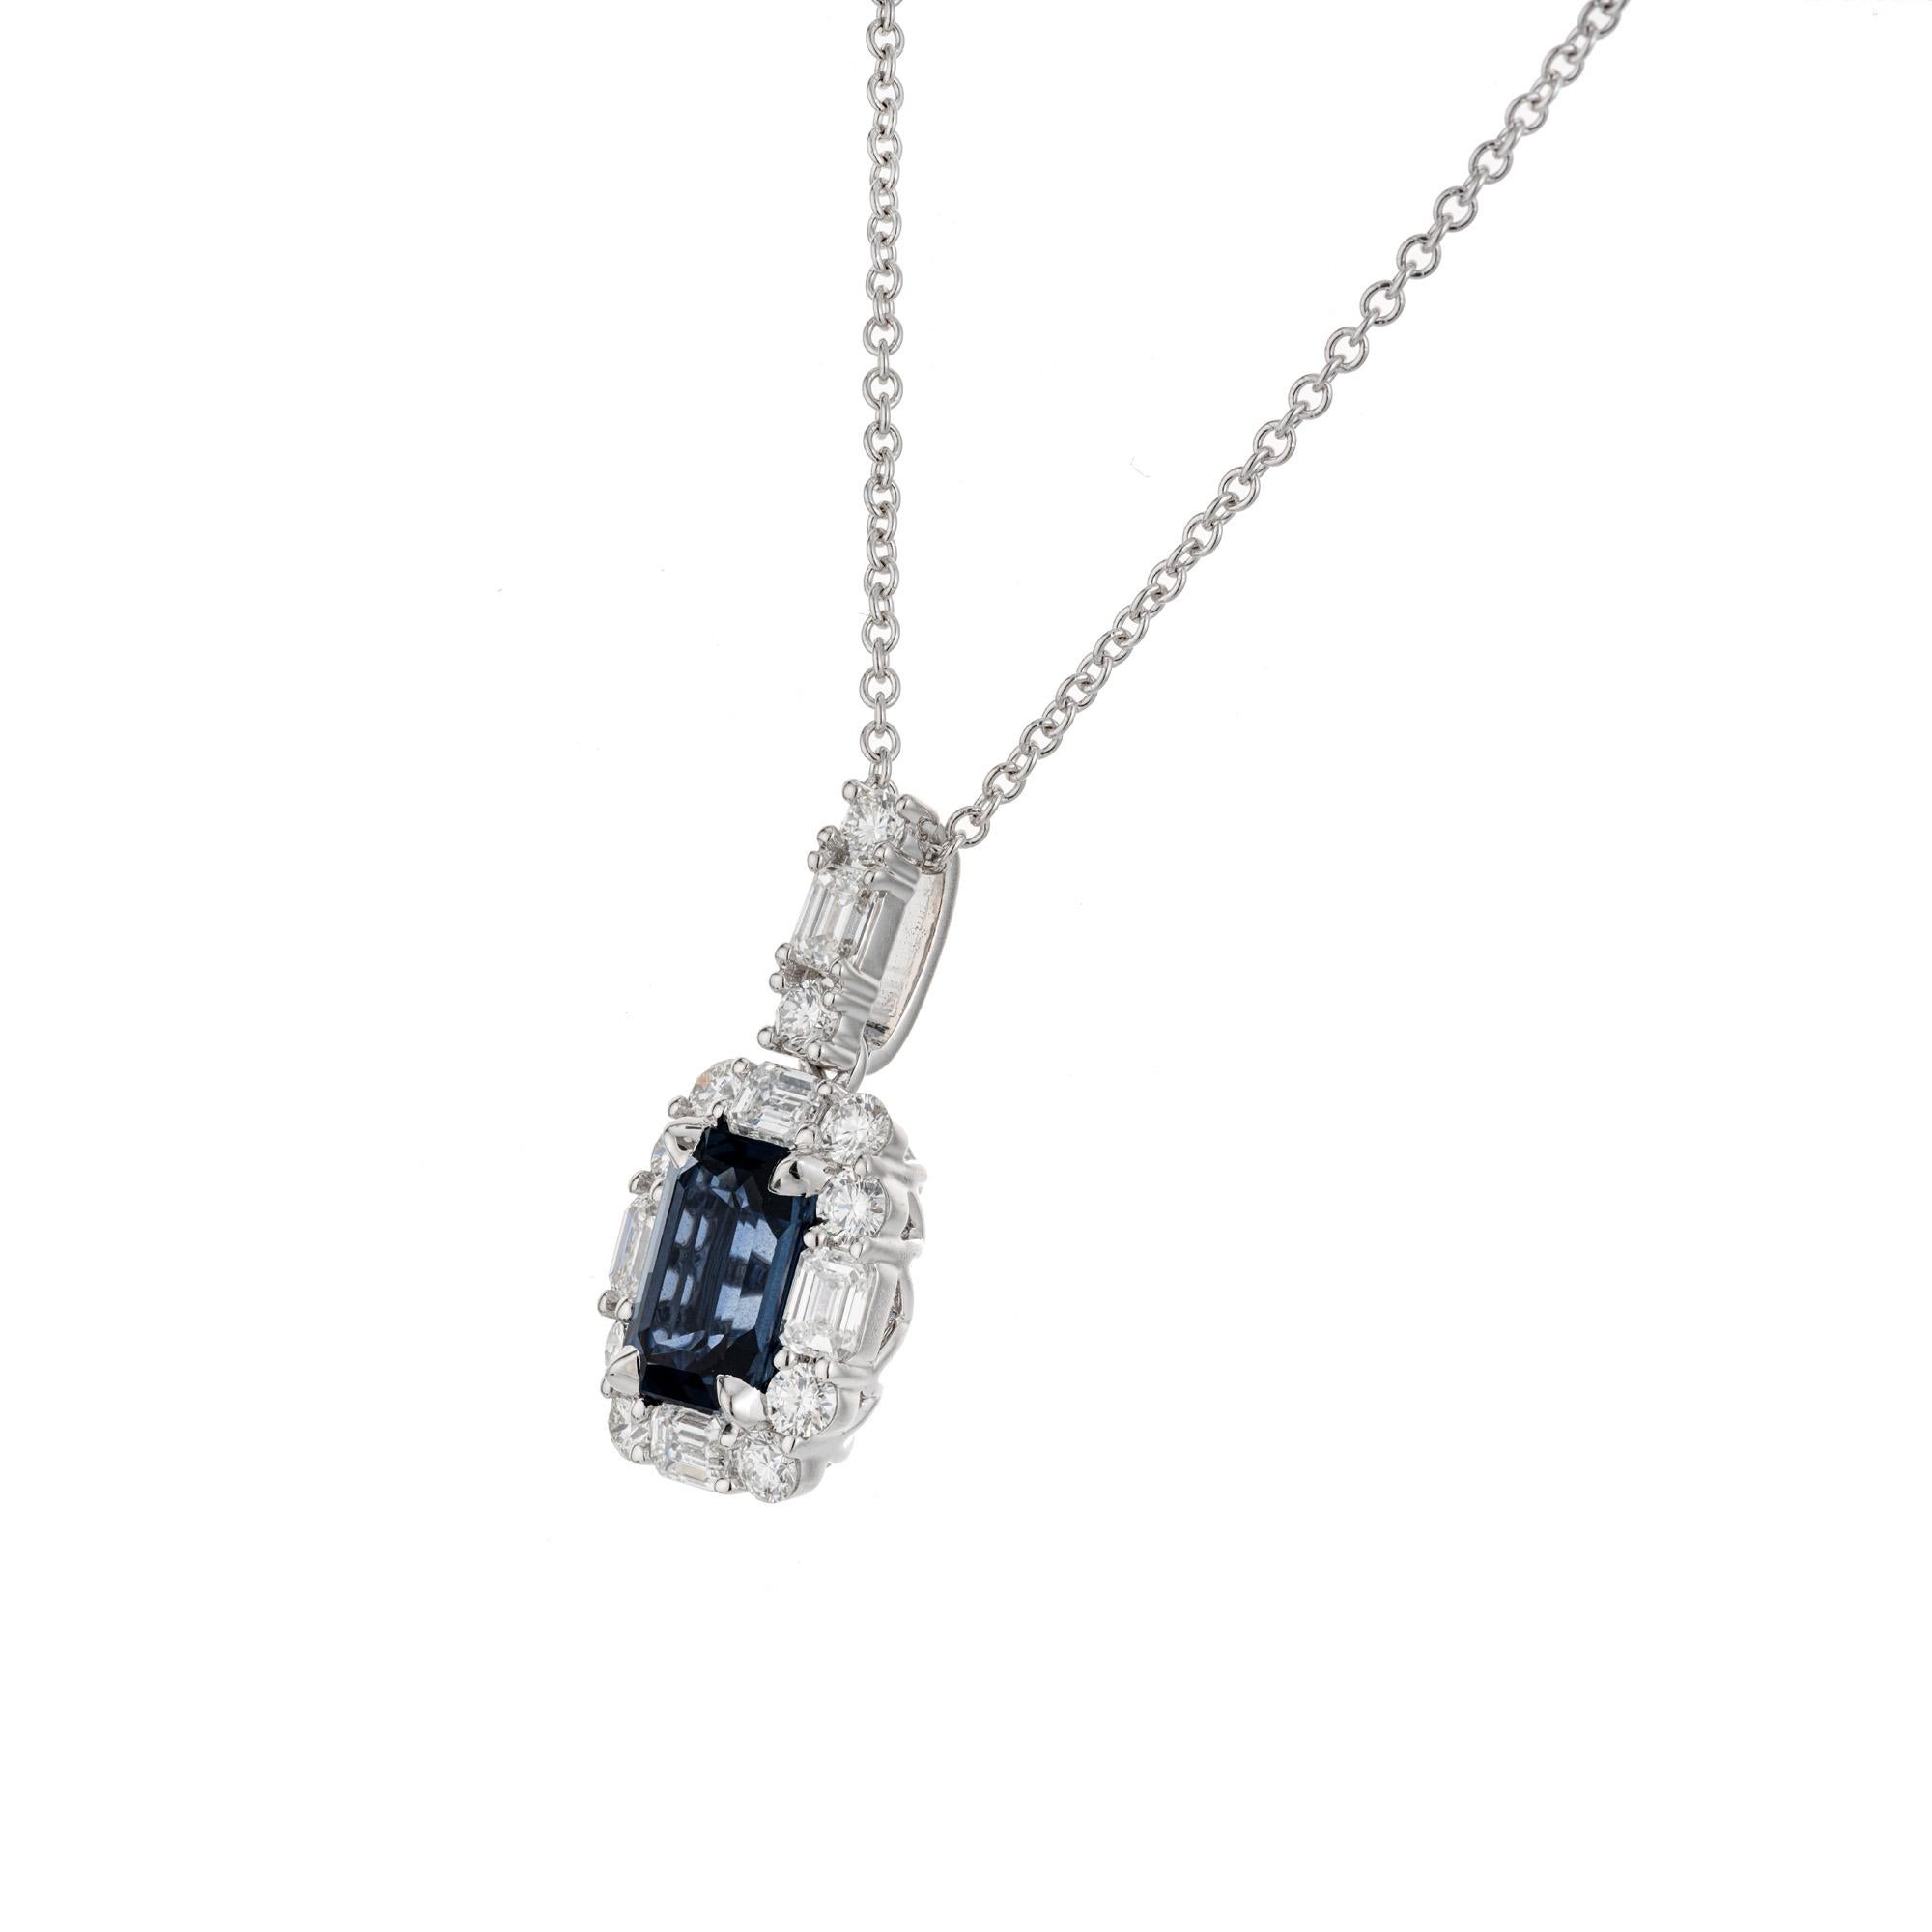 Emerald Cut Peter Suchy GIA Certified 1.63 Carat Sapphire Diamond Gold Pendant Necklace For Sale